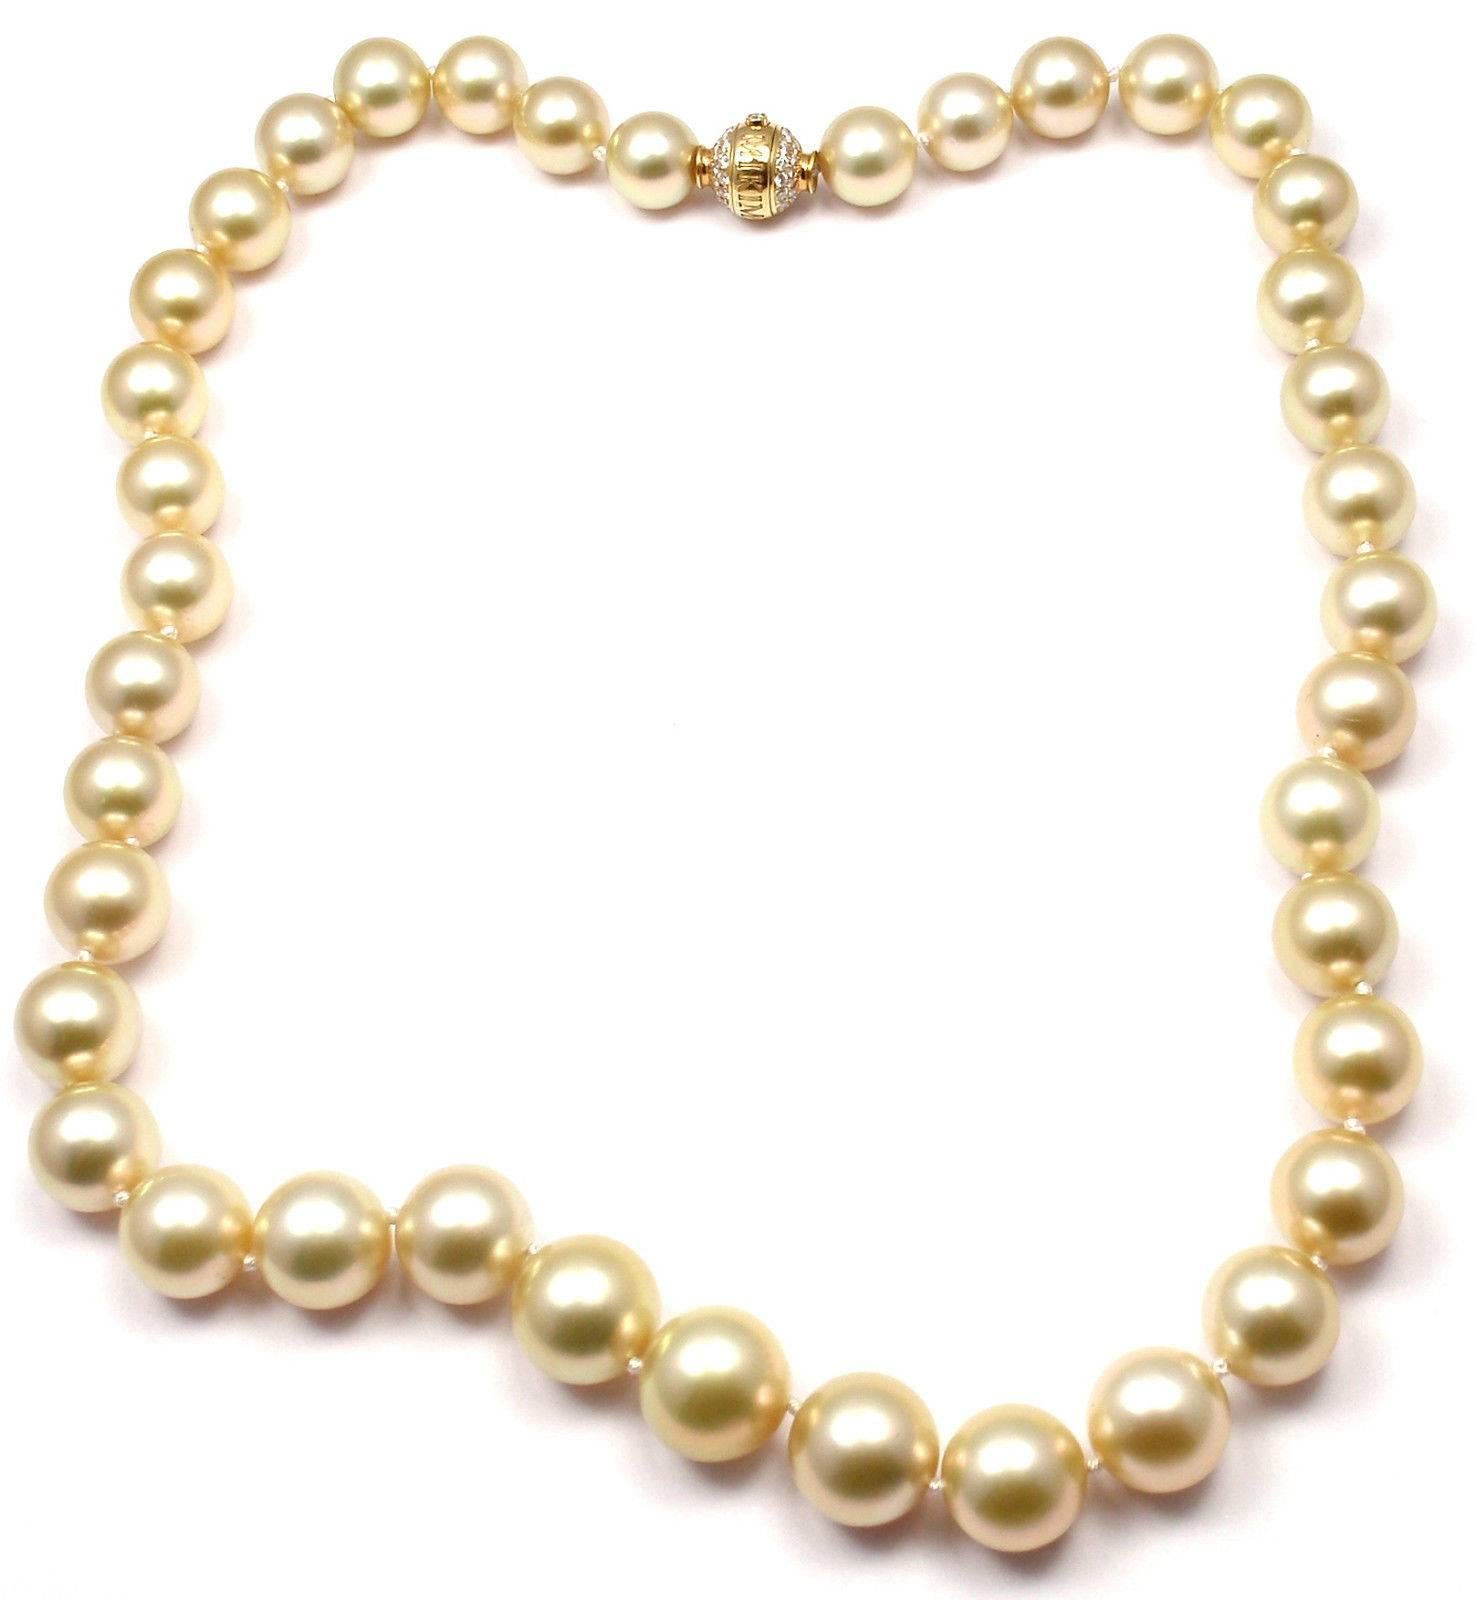 18k Yellow Gold Diamond Large Golden South Sea Peal Necklace by Mikimoto. 
With With 39 Total Golden South Sea Large Pearls, from 13mm - 10mm in diameter, on a 19